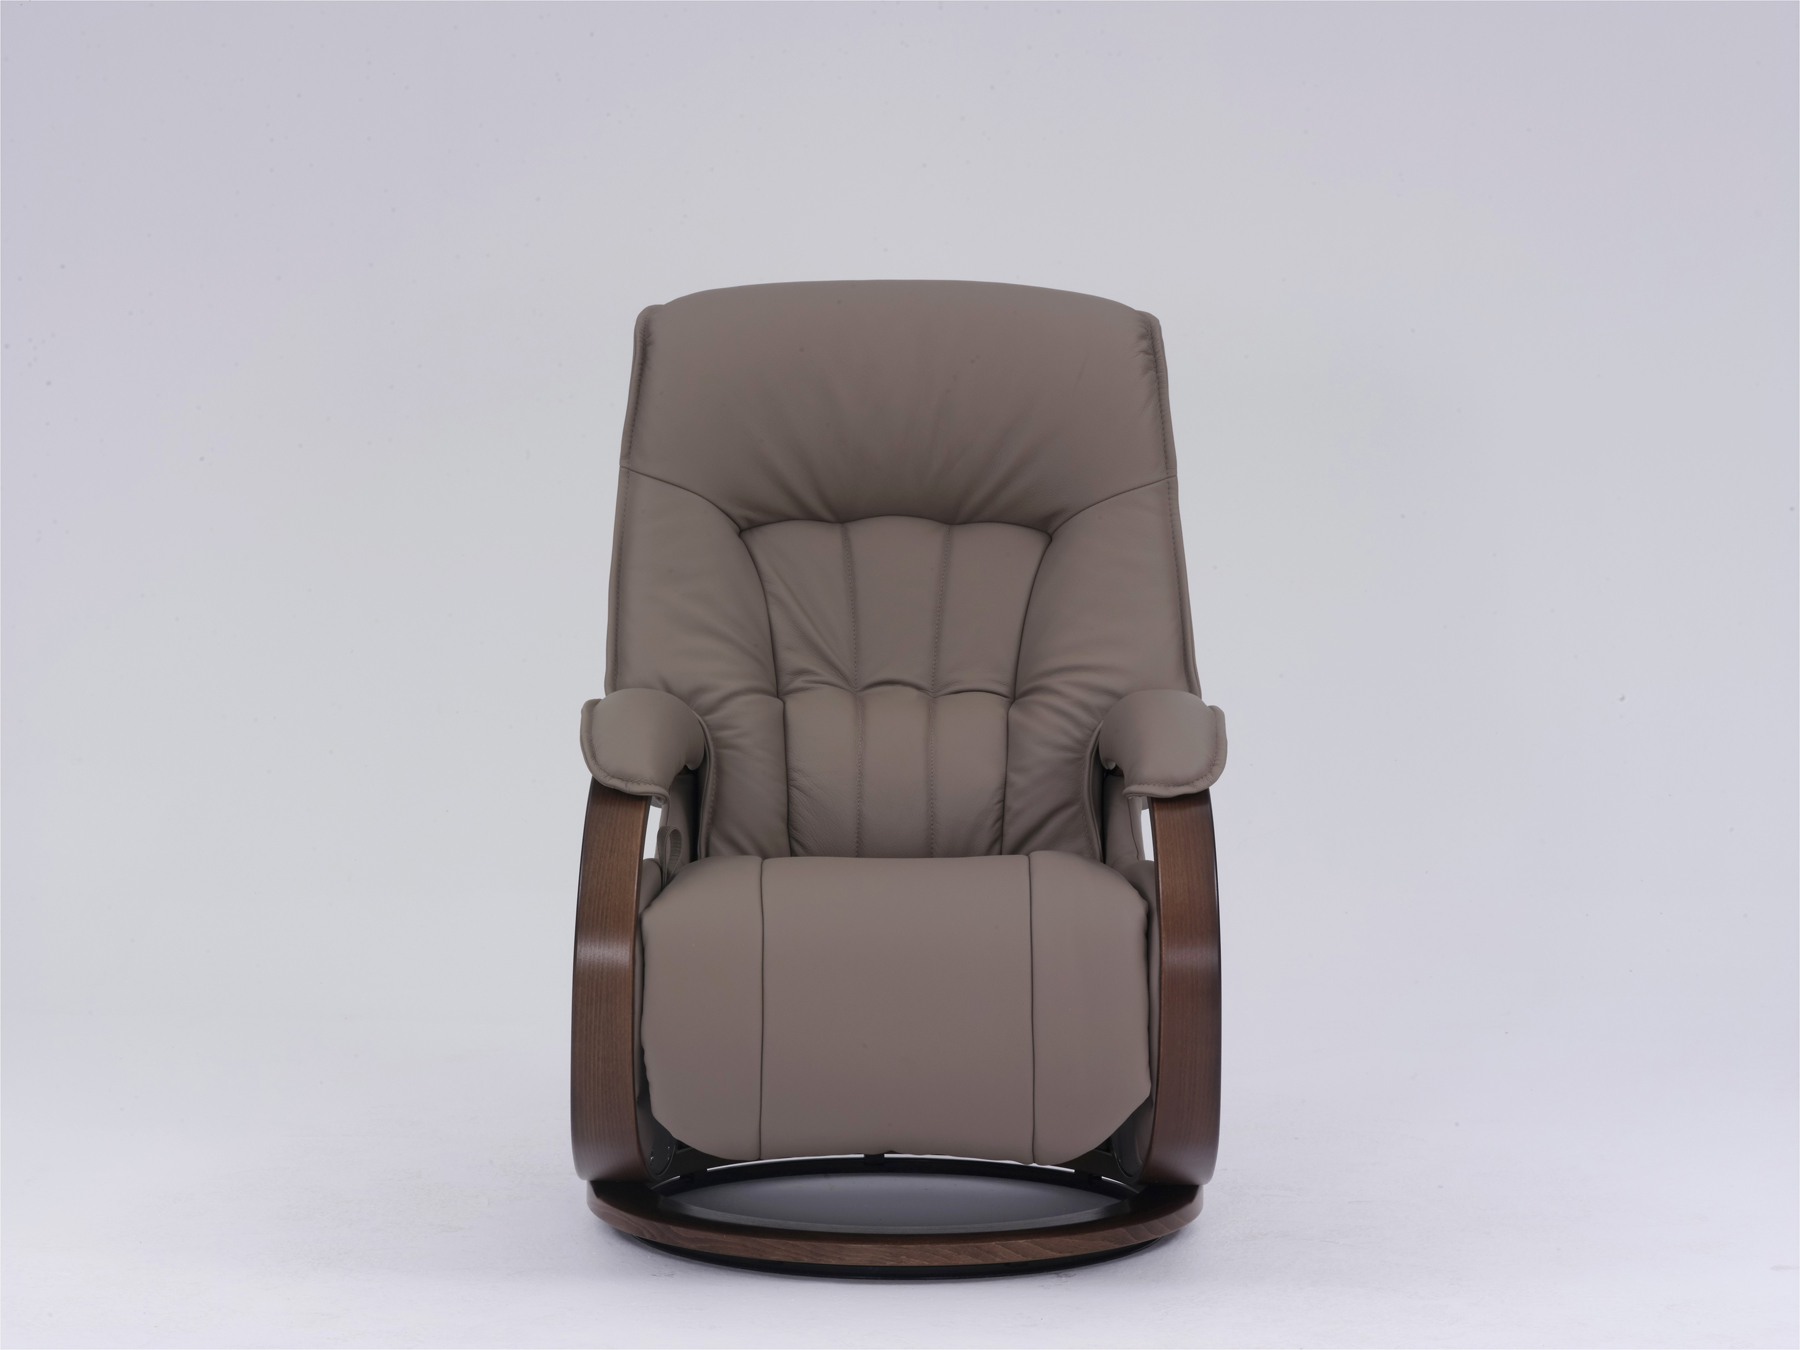 HIMOLLA MOSEL LEATHER CHAIR FRONT VIEW